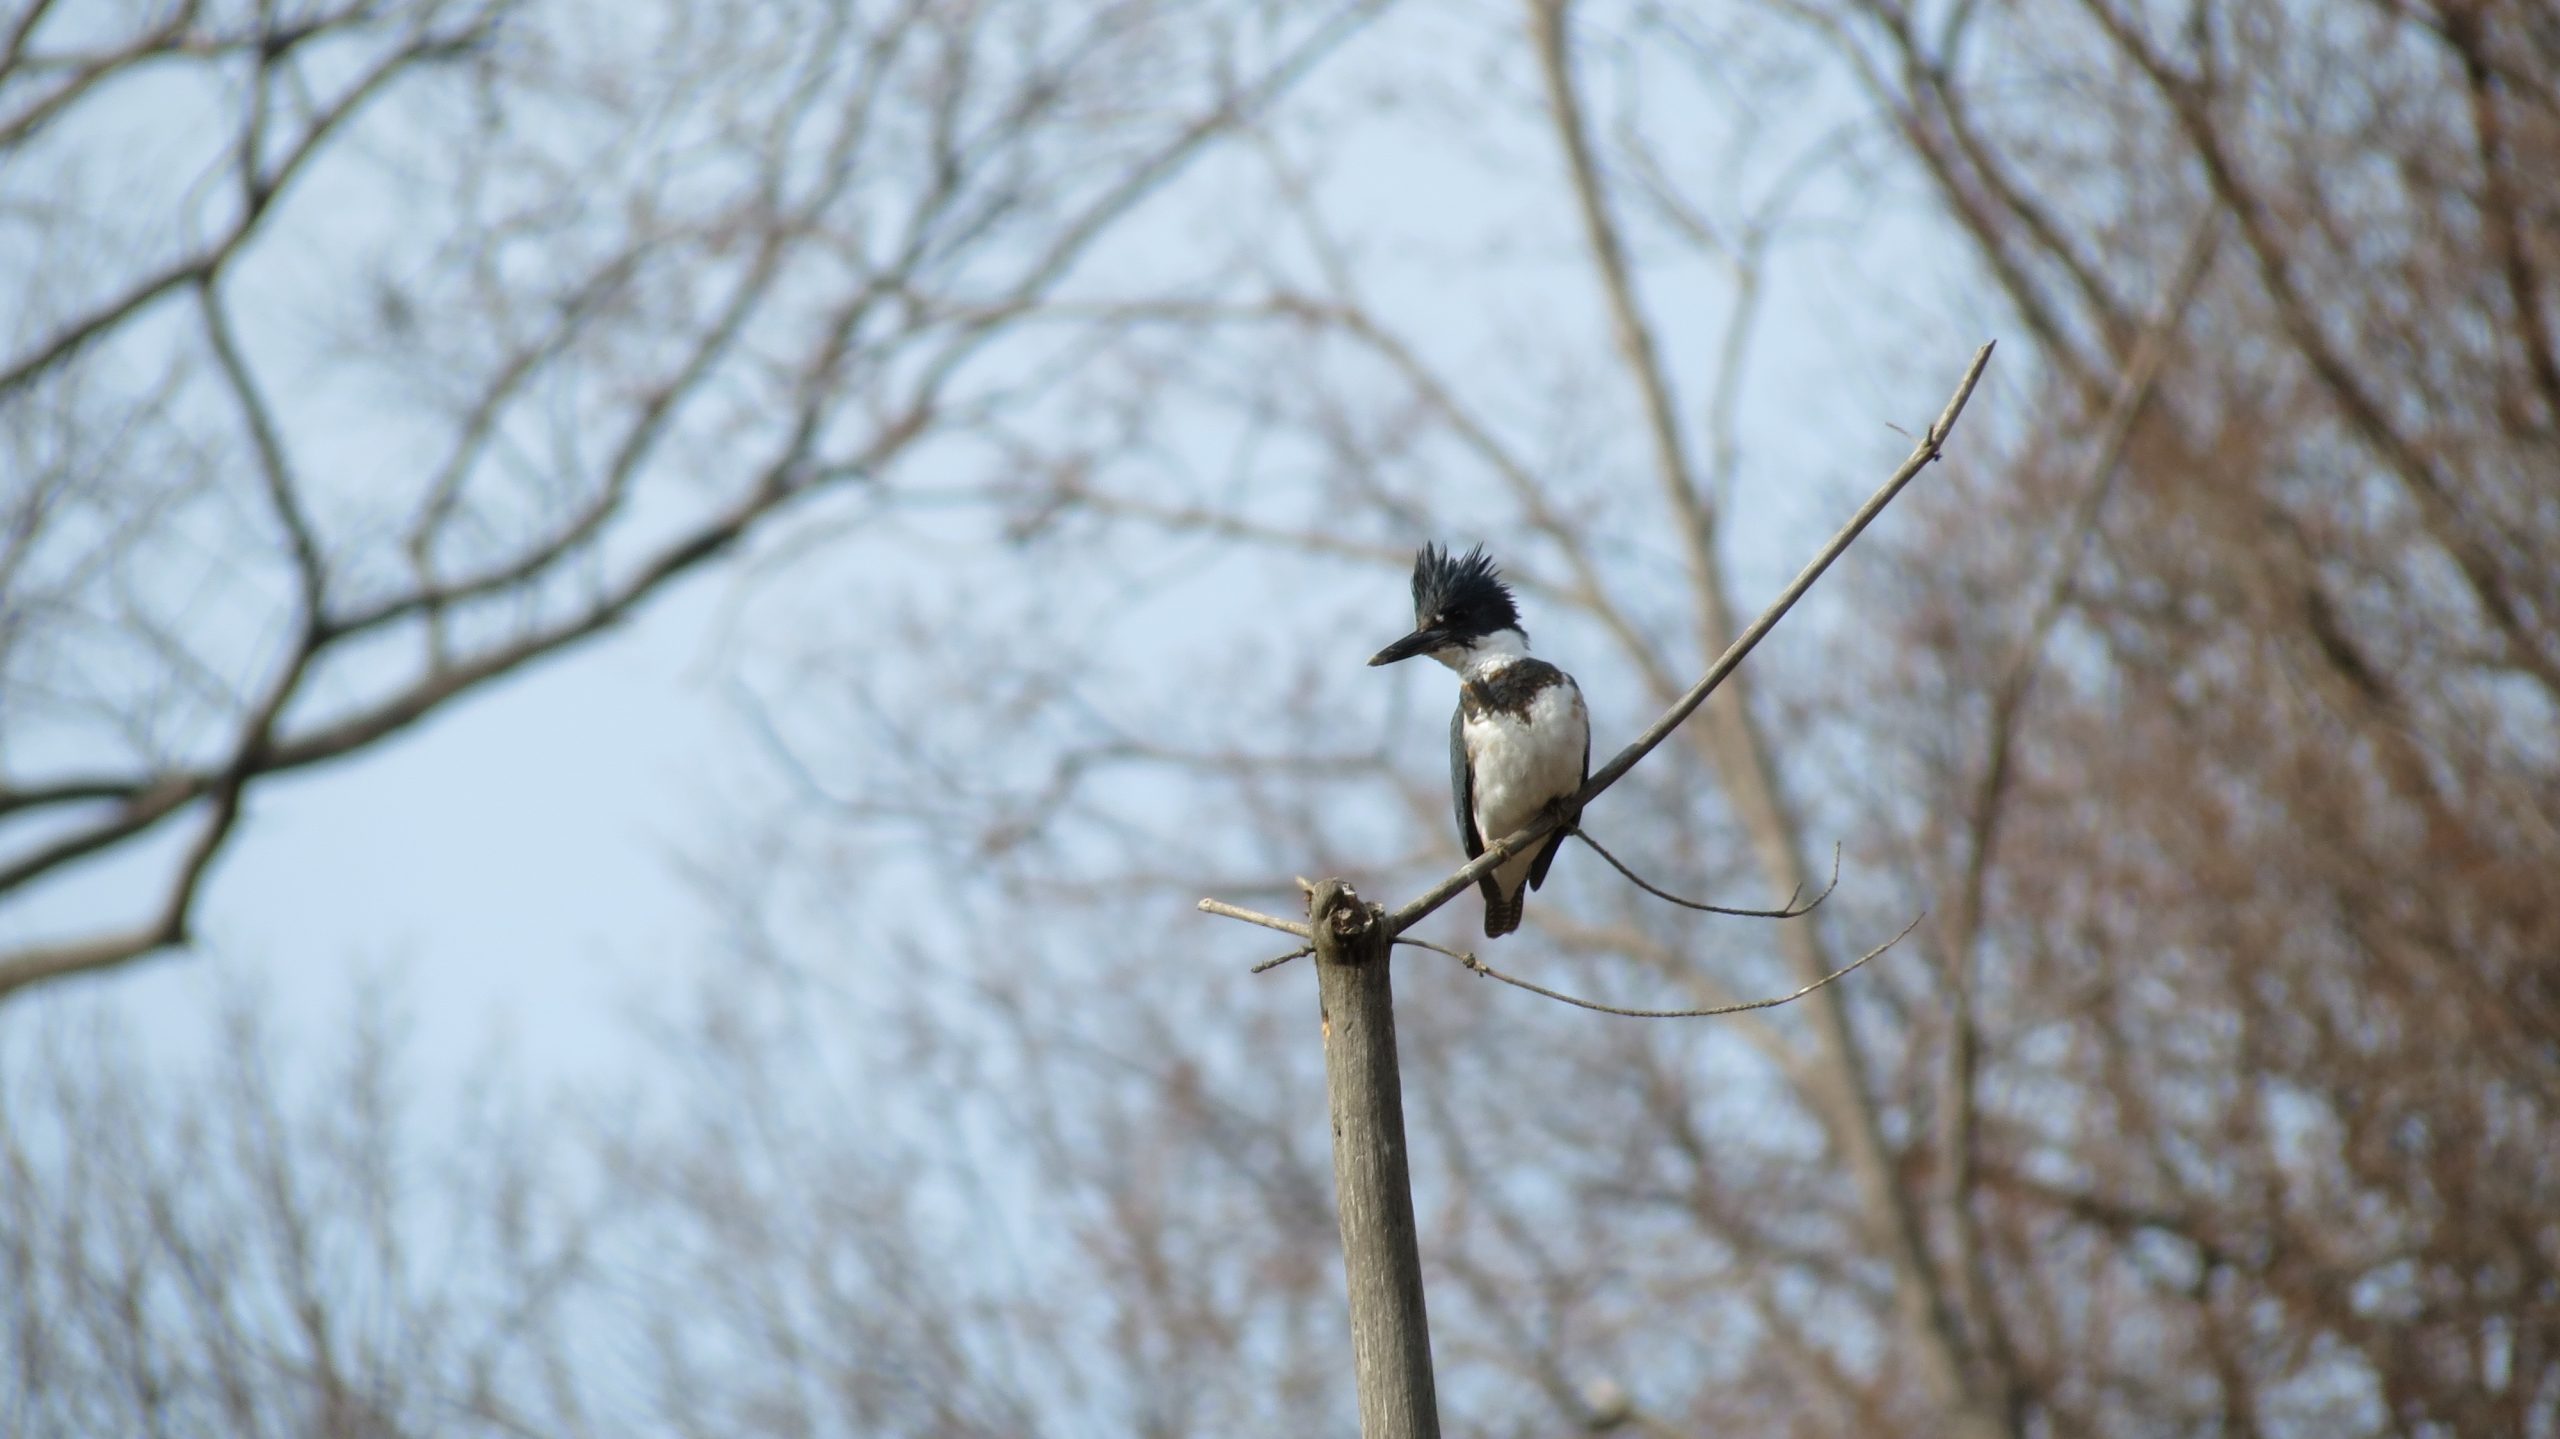 A belted kingfisher, with predominately black and white markings and a shaggy crest on its head, perched on a branch in Taylor Creek Park.